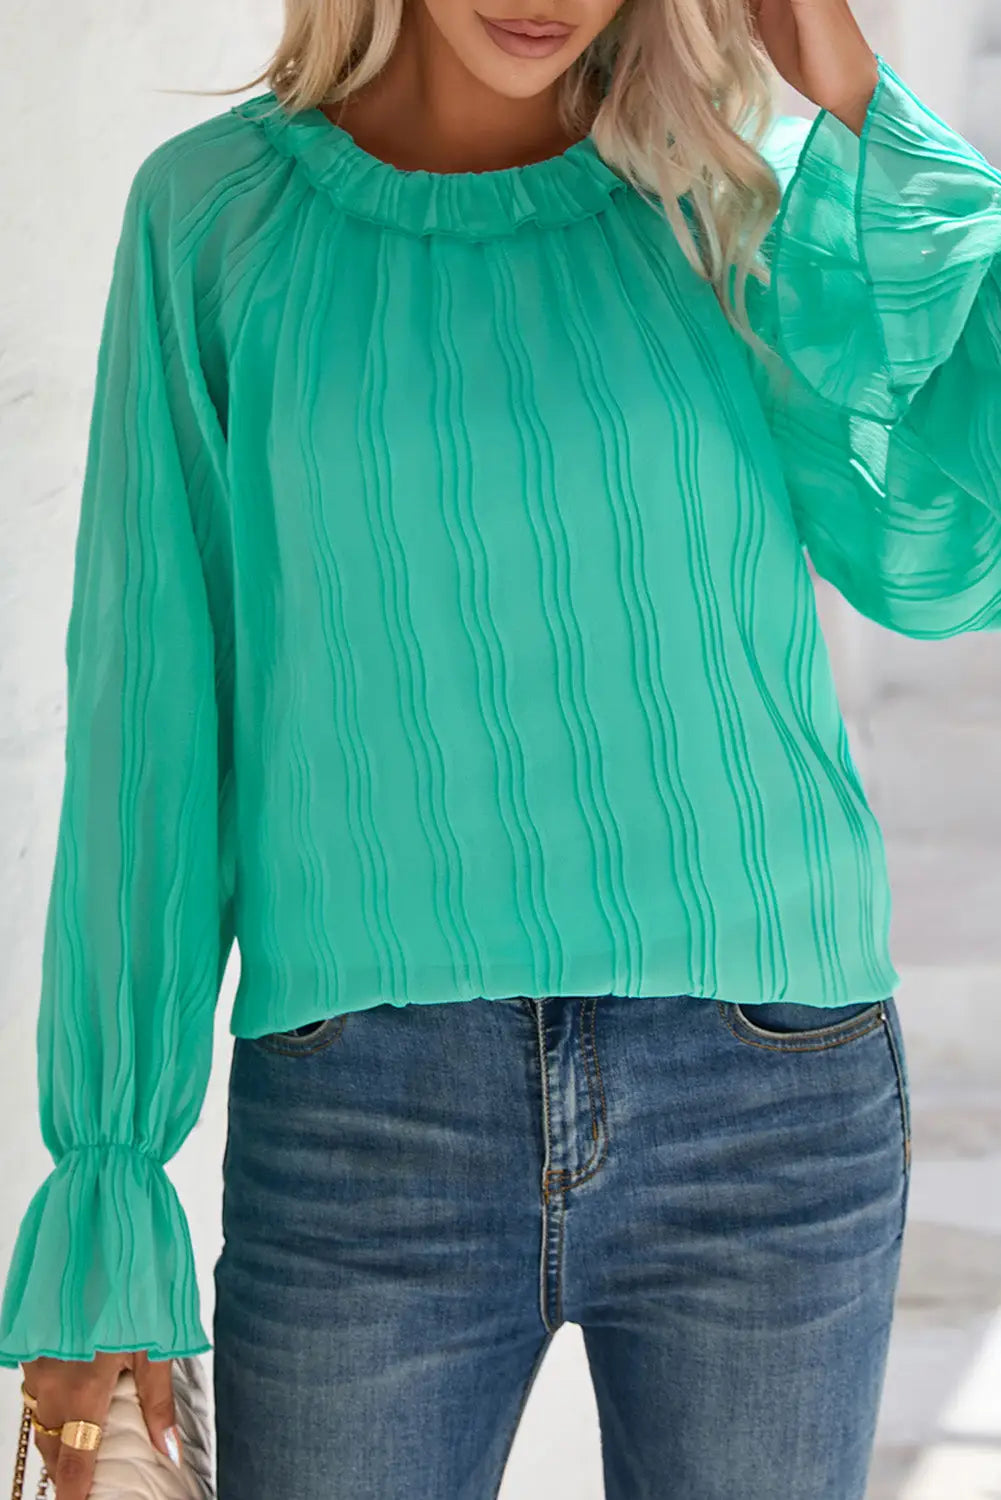 Green striking pleated flared cuff long sleeve blouse - s / 100% polyester - tops